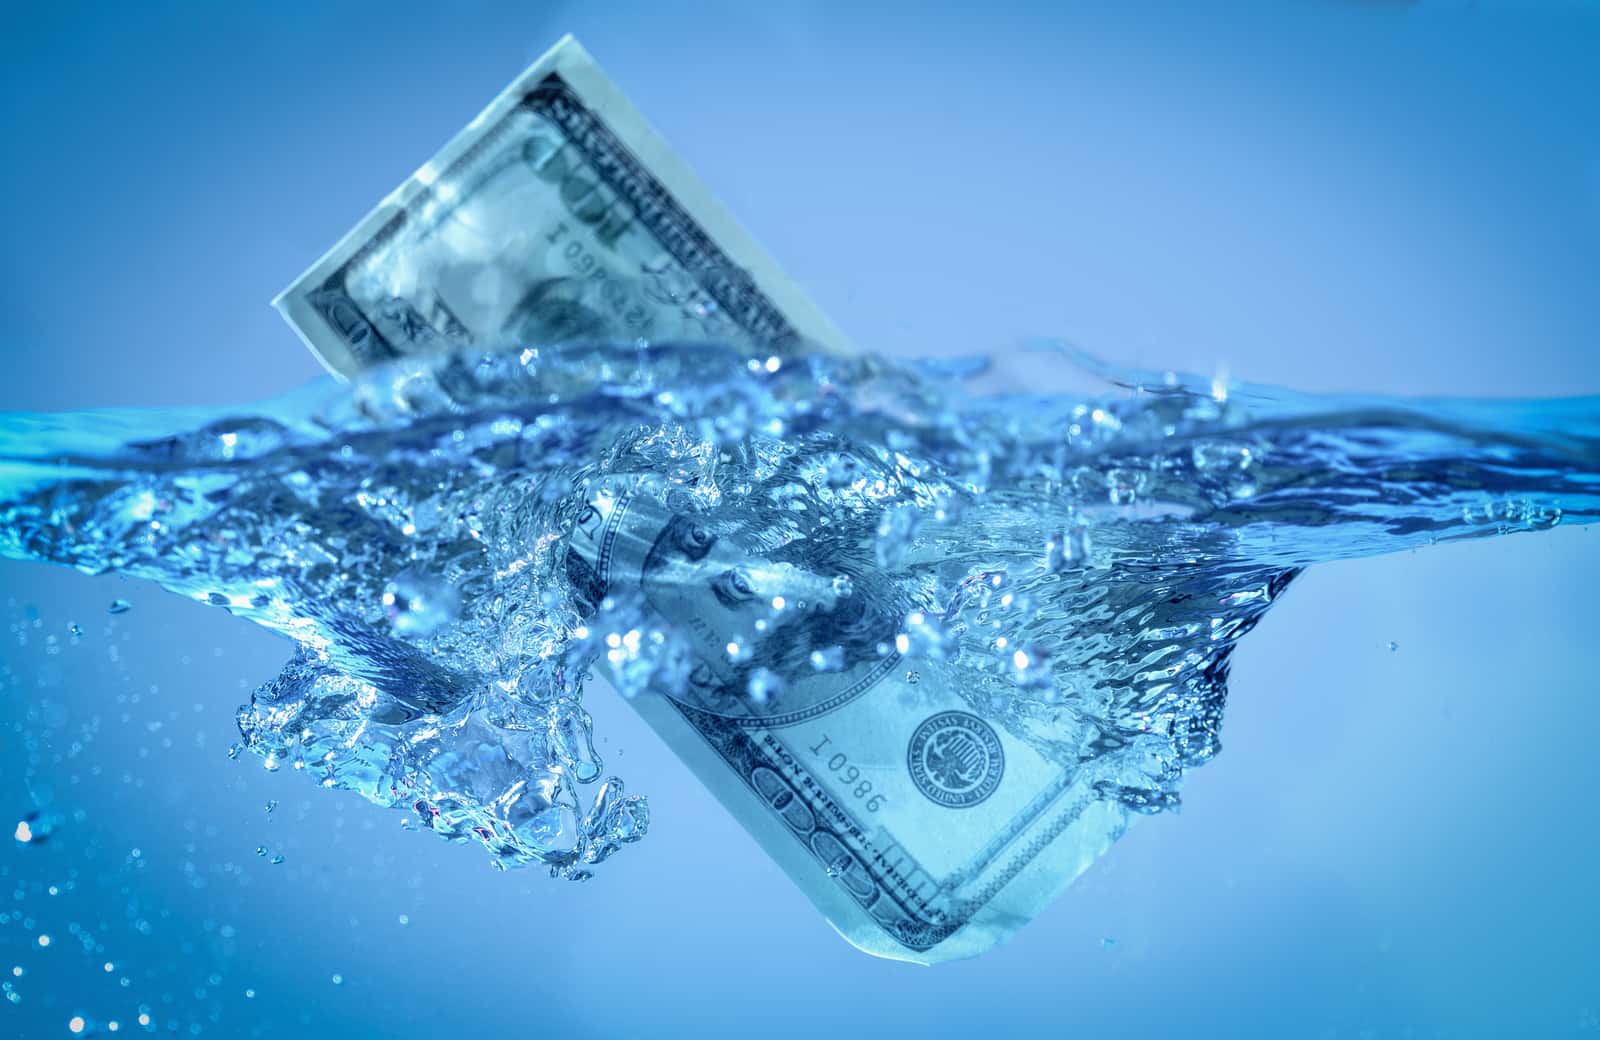 Image of a $100 bill submerged in water to express support of stimulus funding for water programs | Climate Nexus Polls